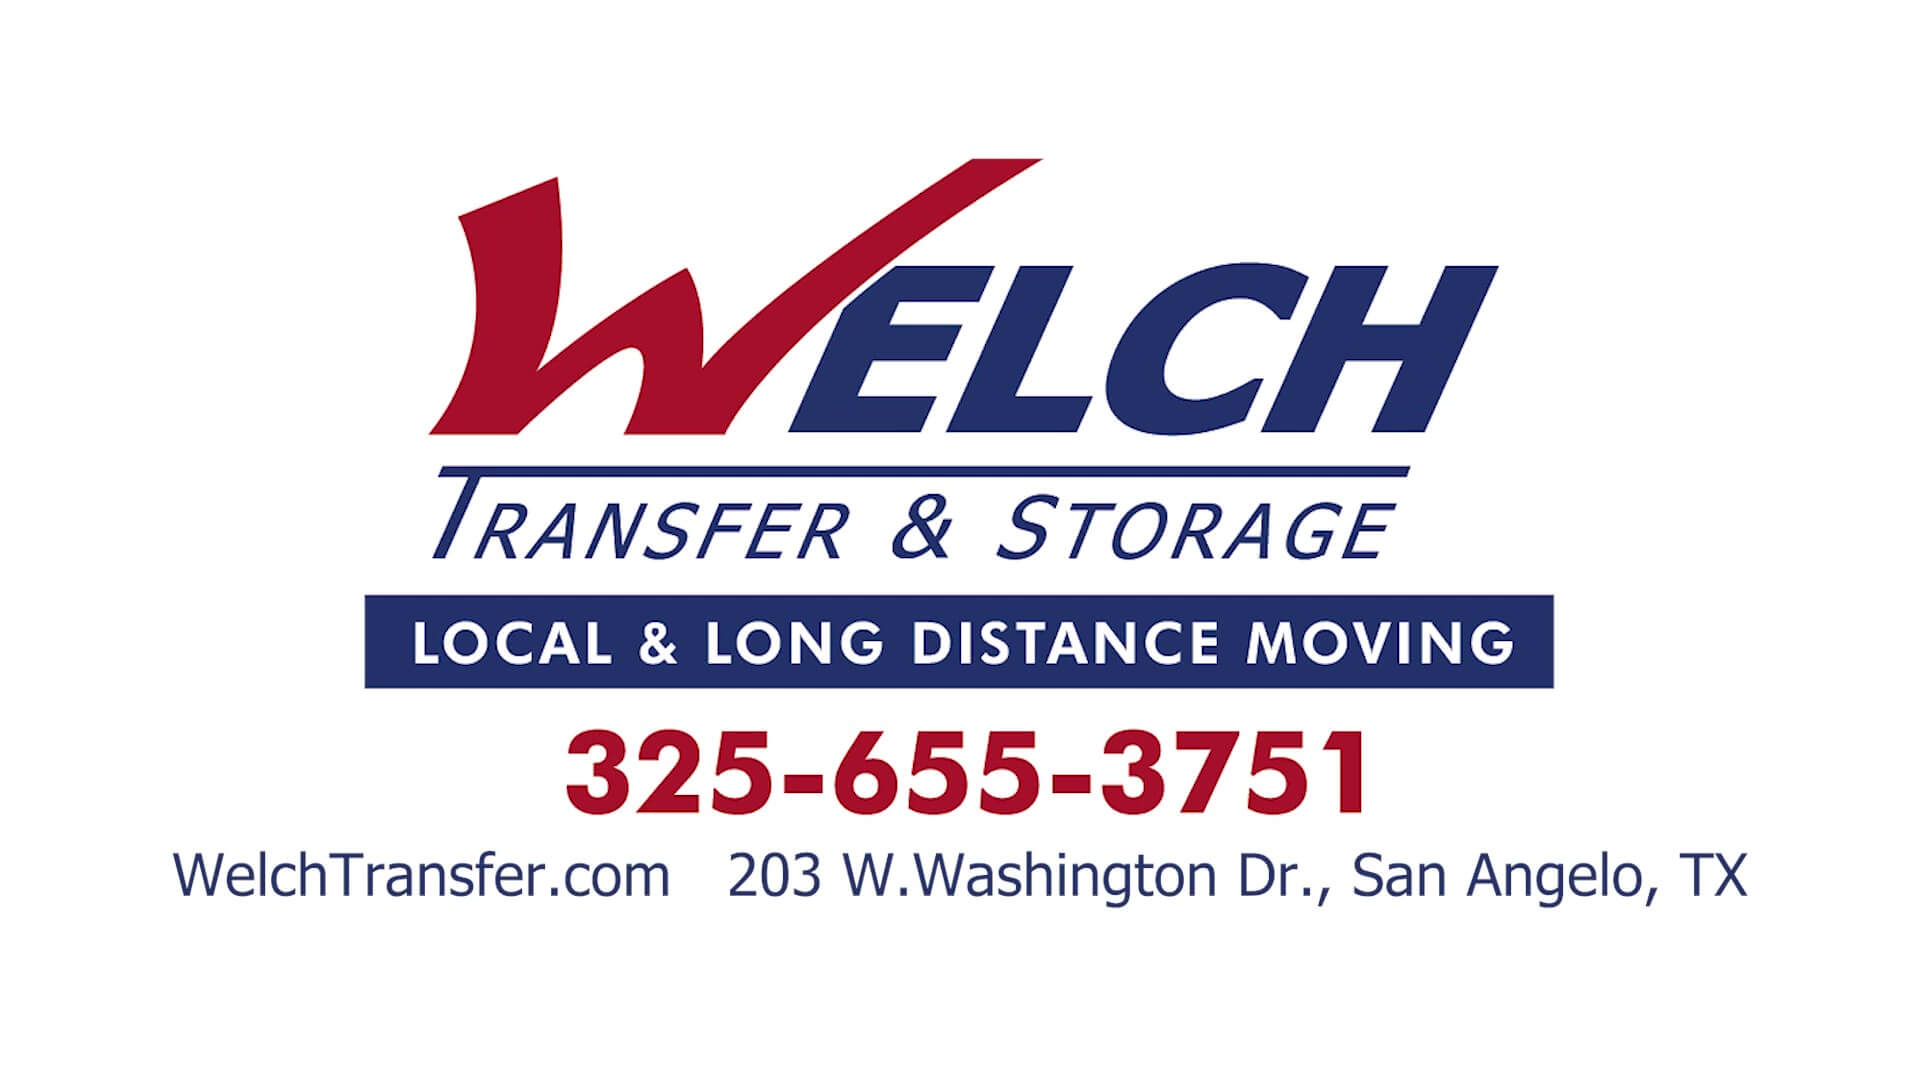 Welch Transfer and Storage